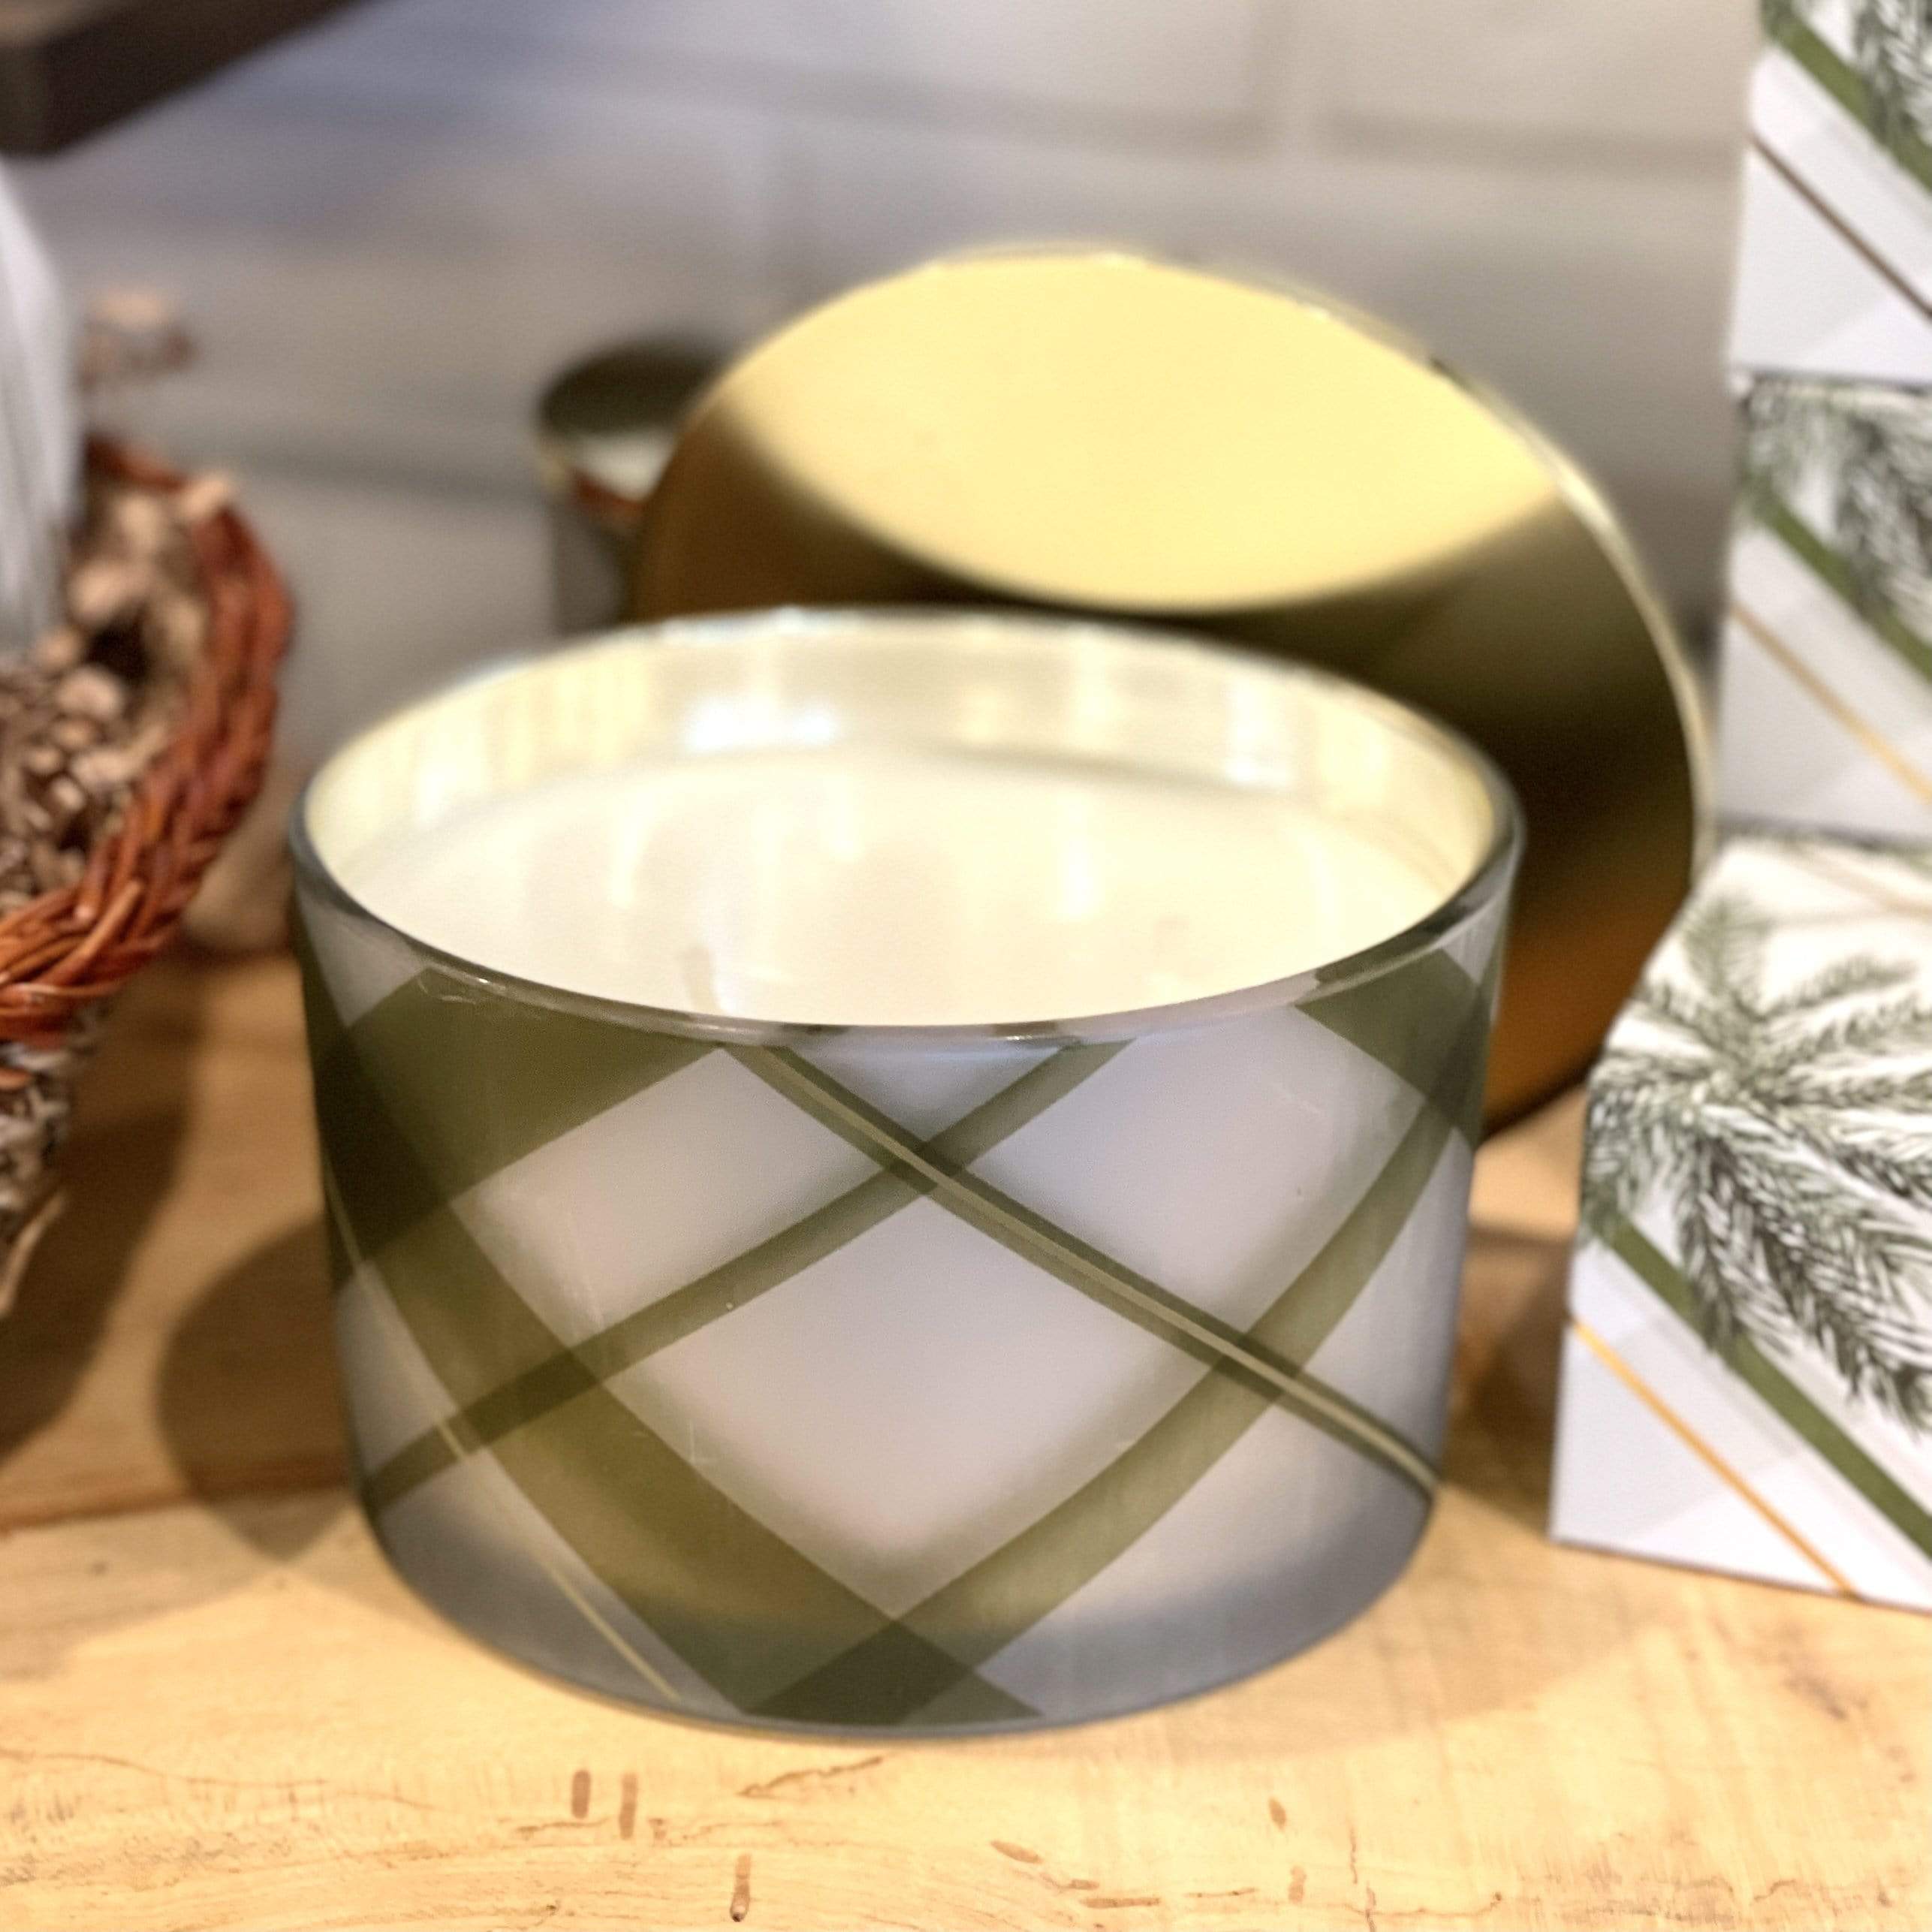 Frasier Fir Frosted Plaid Candle